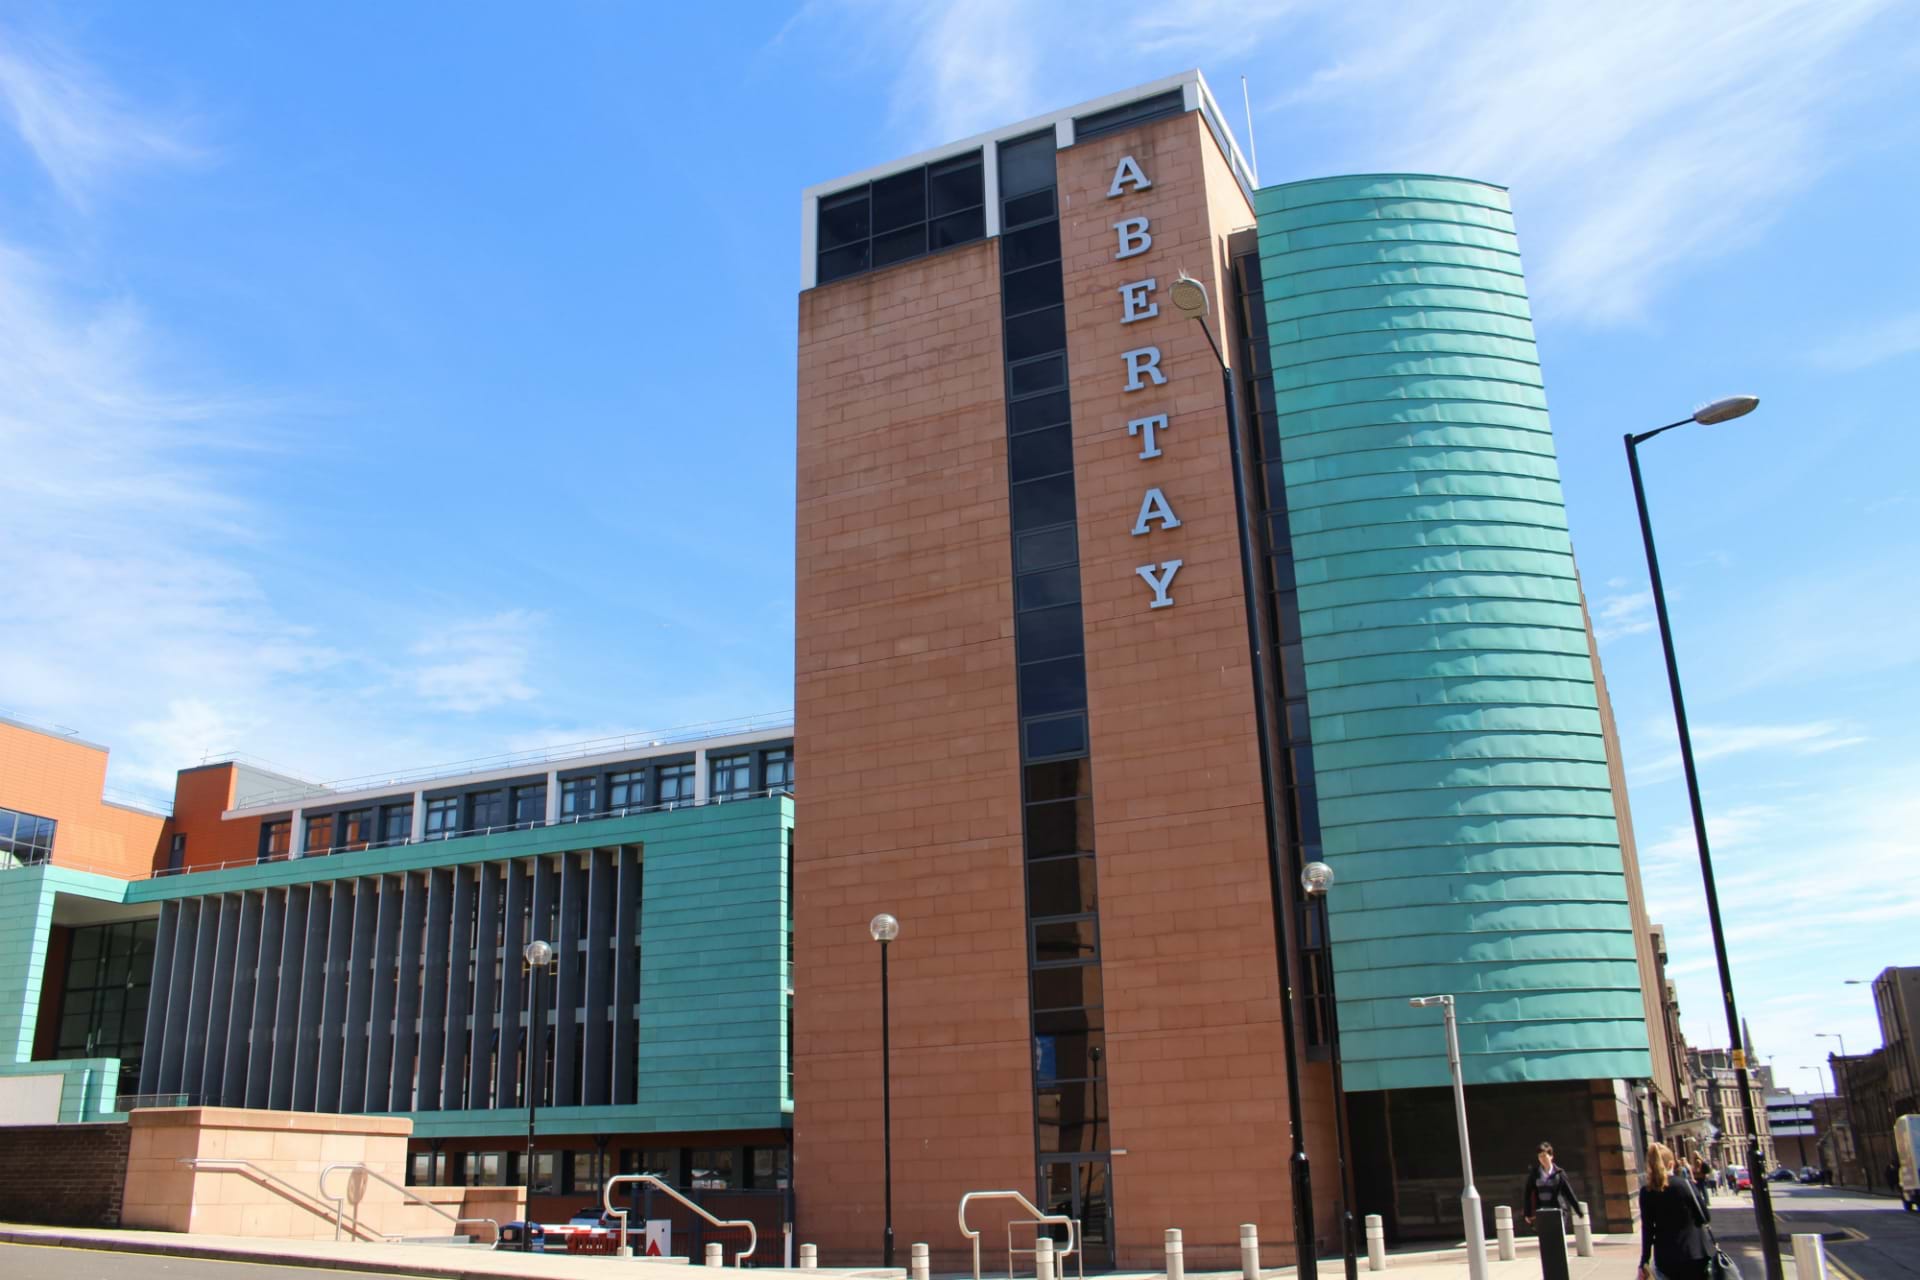 The Kydd Building on Abertay's Campus